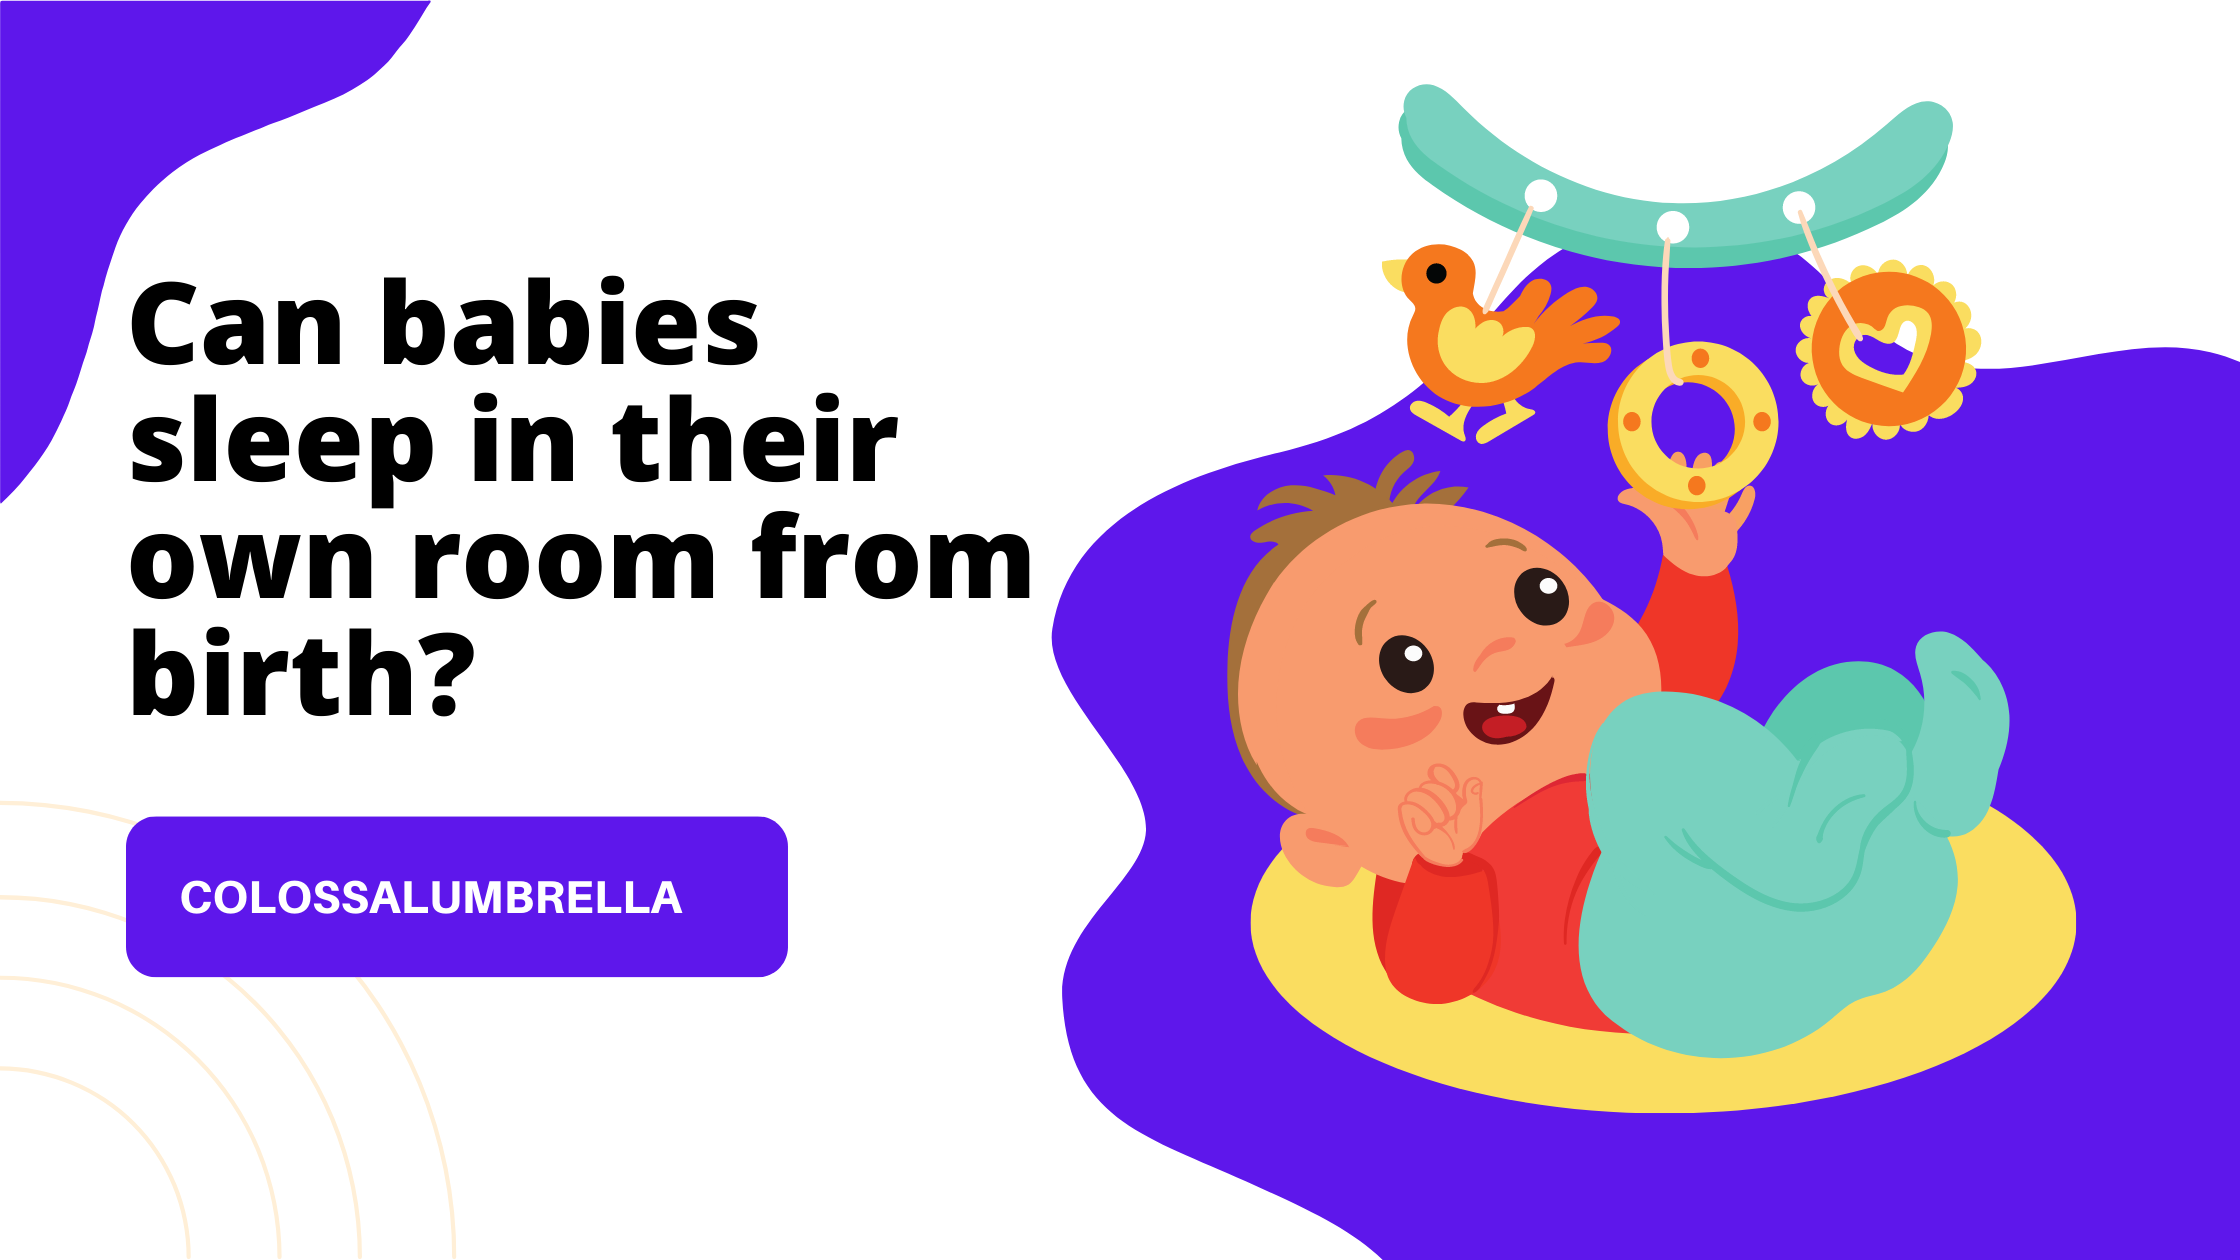 Can babies sleep in their own room from birth? Get clarity